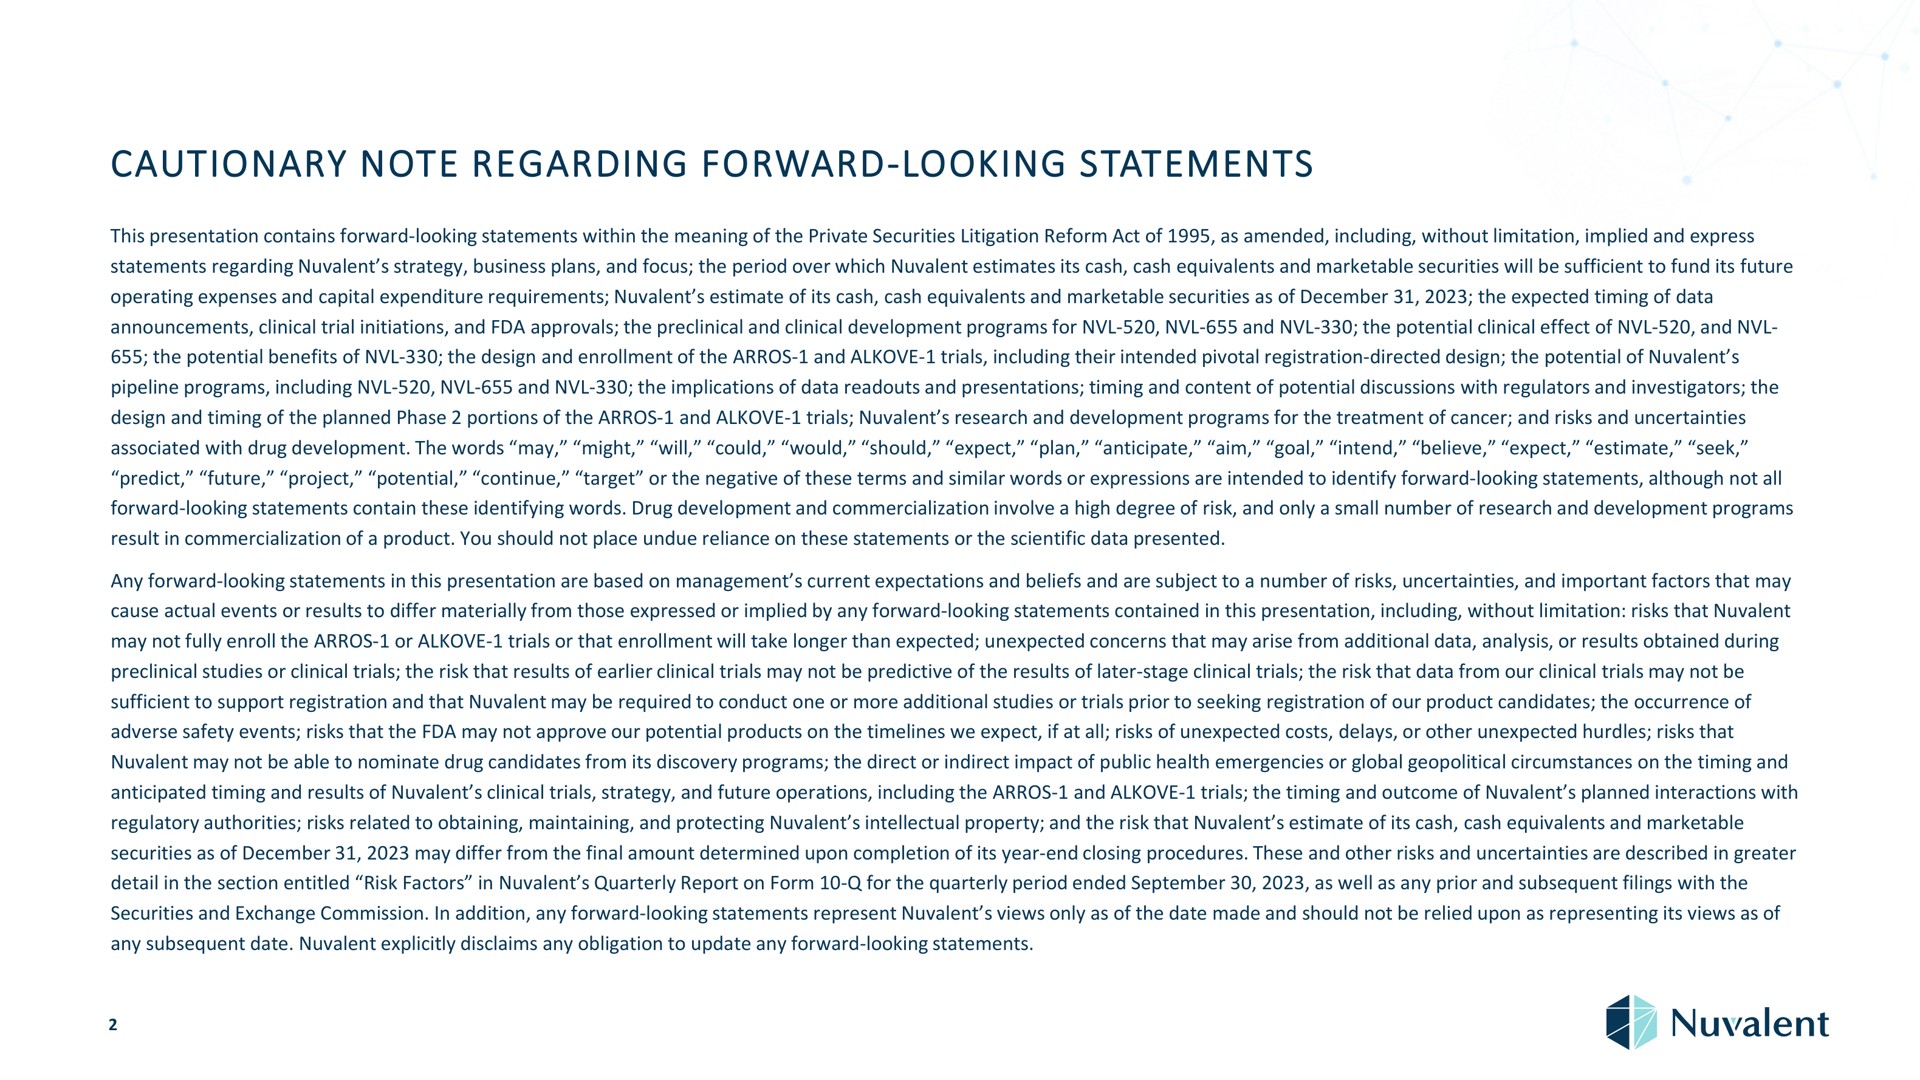 cautionary note regarding forward looking statements this presentation contains forward looking statements within the meaning of the private securities litigation reform act of as amended including without limitation implied and express statements regarding strategy business plans and focus the period over which estimates its cash cash equivalents and marketable securities will be sufficient to fund its future operating expenses and capital expenditure requirements estimate of its cash cash equivalents and marketable securities as of the expected timing of data announcements clinical trial initiations and approvals the preclinical and clinical development programs for and the potential clinical effect of and the potential benefits of the design and enrollment of the and trials including their intended pivotal registration directed design the potential of pipeline programs including and the implications of data and presentations timing and content of potential discussions with regulators and investigators the design and timing of the planned phase portions of the and trials research and development programs for the treatment of cancer and risks and uncertainties associated with drug development the words may might will could would should expect plan anticipate yuan aim goal intend believe expect estimate seek predict future project potential continue target or the negative of these terms and similar words or expressions are intended to identify forward looking statements although not all forward looking statements contain these identifying words drug development and commercialization involve a high degree of risk and only a small number of research and development programs result in commercialization of a product you should not place undue reliance on these statements or the scientific data presented any forward looking statements in this presentation are based on management current expectations and beliefs and are subject to a number of risks uncertainties and important factors that may cause actual events or results to differ materially from those expressed or implied by any forward looking statements contained in this presentation including without limitation risks that may not fully enroll the or trials or that enrollment will take longer than expected unexpected concerns that may arise from additional data analysis or results obtained during preclinical studies or clinical trials the risk that results of clinical trials may not be predictive of the results of later stage clinical trials the risk that data from our clinical trials may not be sufficient to support registration and that may be required to conduct one or more additional studies or trials prior to seeking registration of our product candidates the occurrence of adverse safety events risks that the may not approve our potential products on the we expect if at all risks of unexpected costs delays or other unexpected hurdles risks that may not be able to nominate drug candidates from its discovery programs the direct or indirect impact of public health emergencies or global geopolitical circumstances on the timing and anticipated timing and results of clinical trials strategy and future operations including the and trials the timing and outcome of planned interactions with regulatory authorities risks related to obtaining maintaining and protecting intellectual property and the risk that estimate of its cash cash equivalents and marketable securities as of may differ from the final amount determined upon completion of its year end closing procedures these and other risks and uncertainties are described in greater detail in the section entitled risk factors in quarterly report on form for the quarterly period ended as well as any prior and subsequent filings with the securities and exchange commission in addition any forward looking statements represent views only as of the date made and should not be relied upon as representing its views as of any subsequent date explicitly disclaims any obligation to update any forward looking statements | Nuvalent